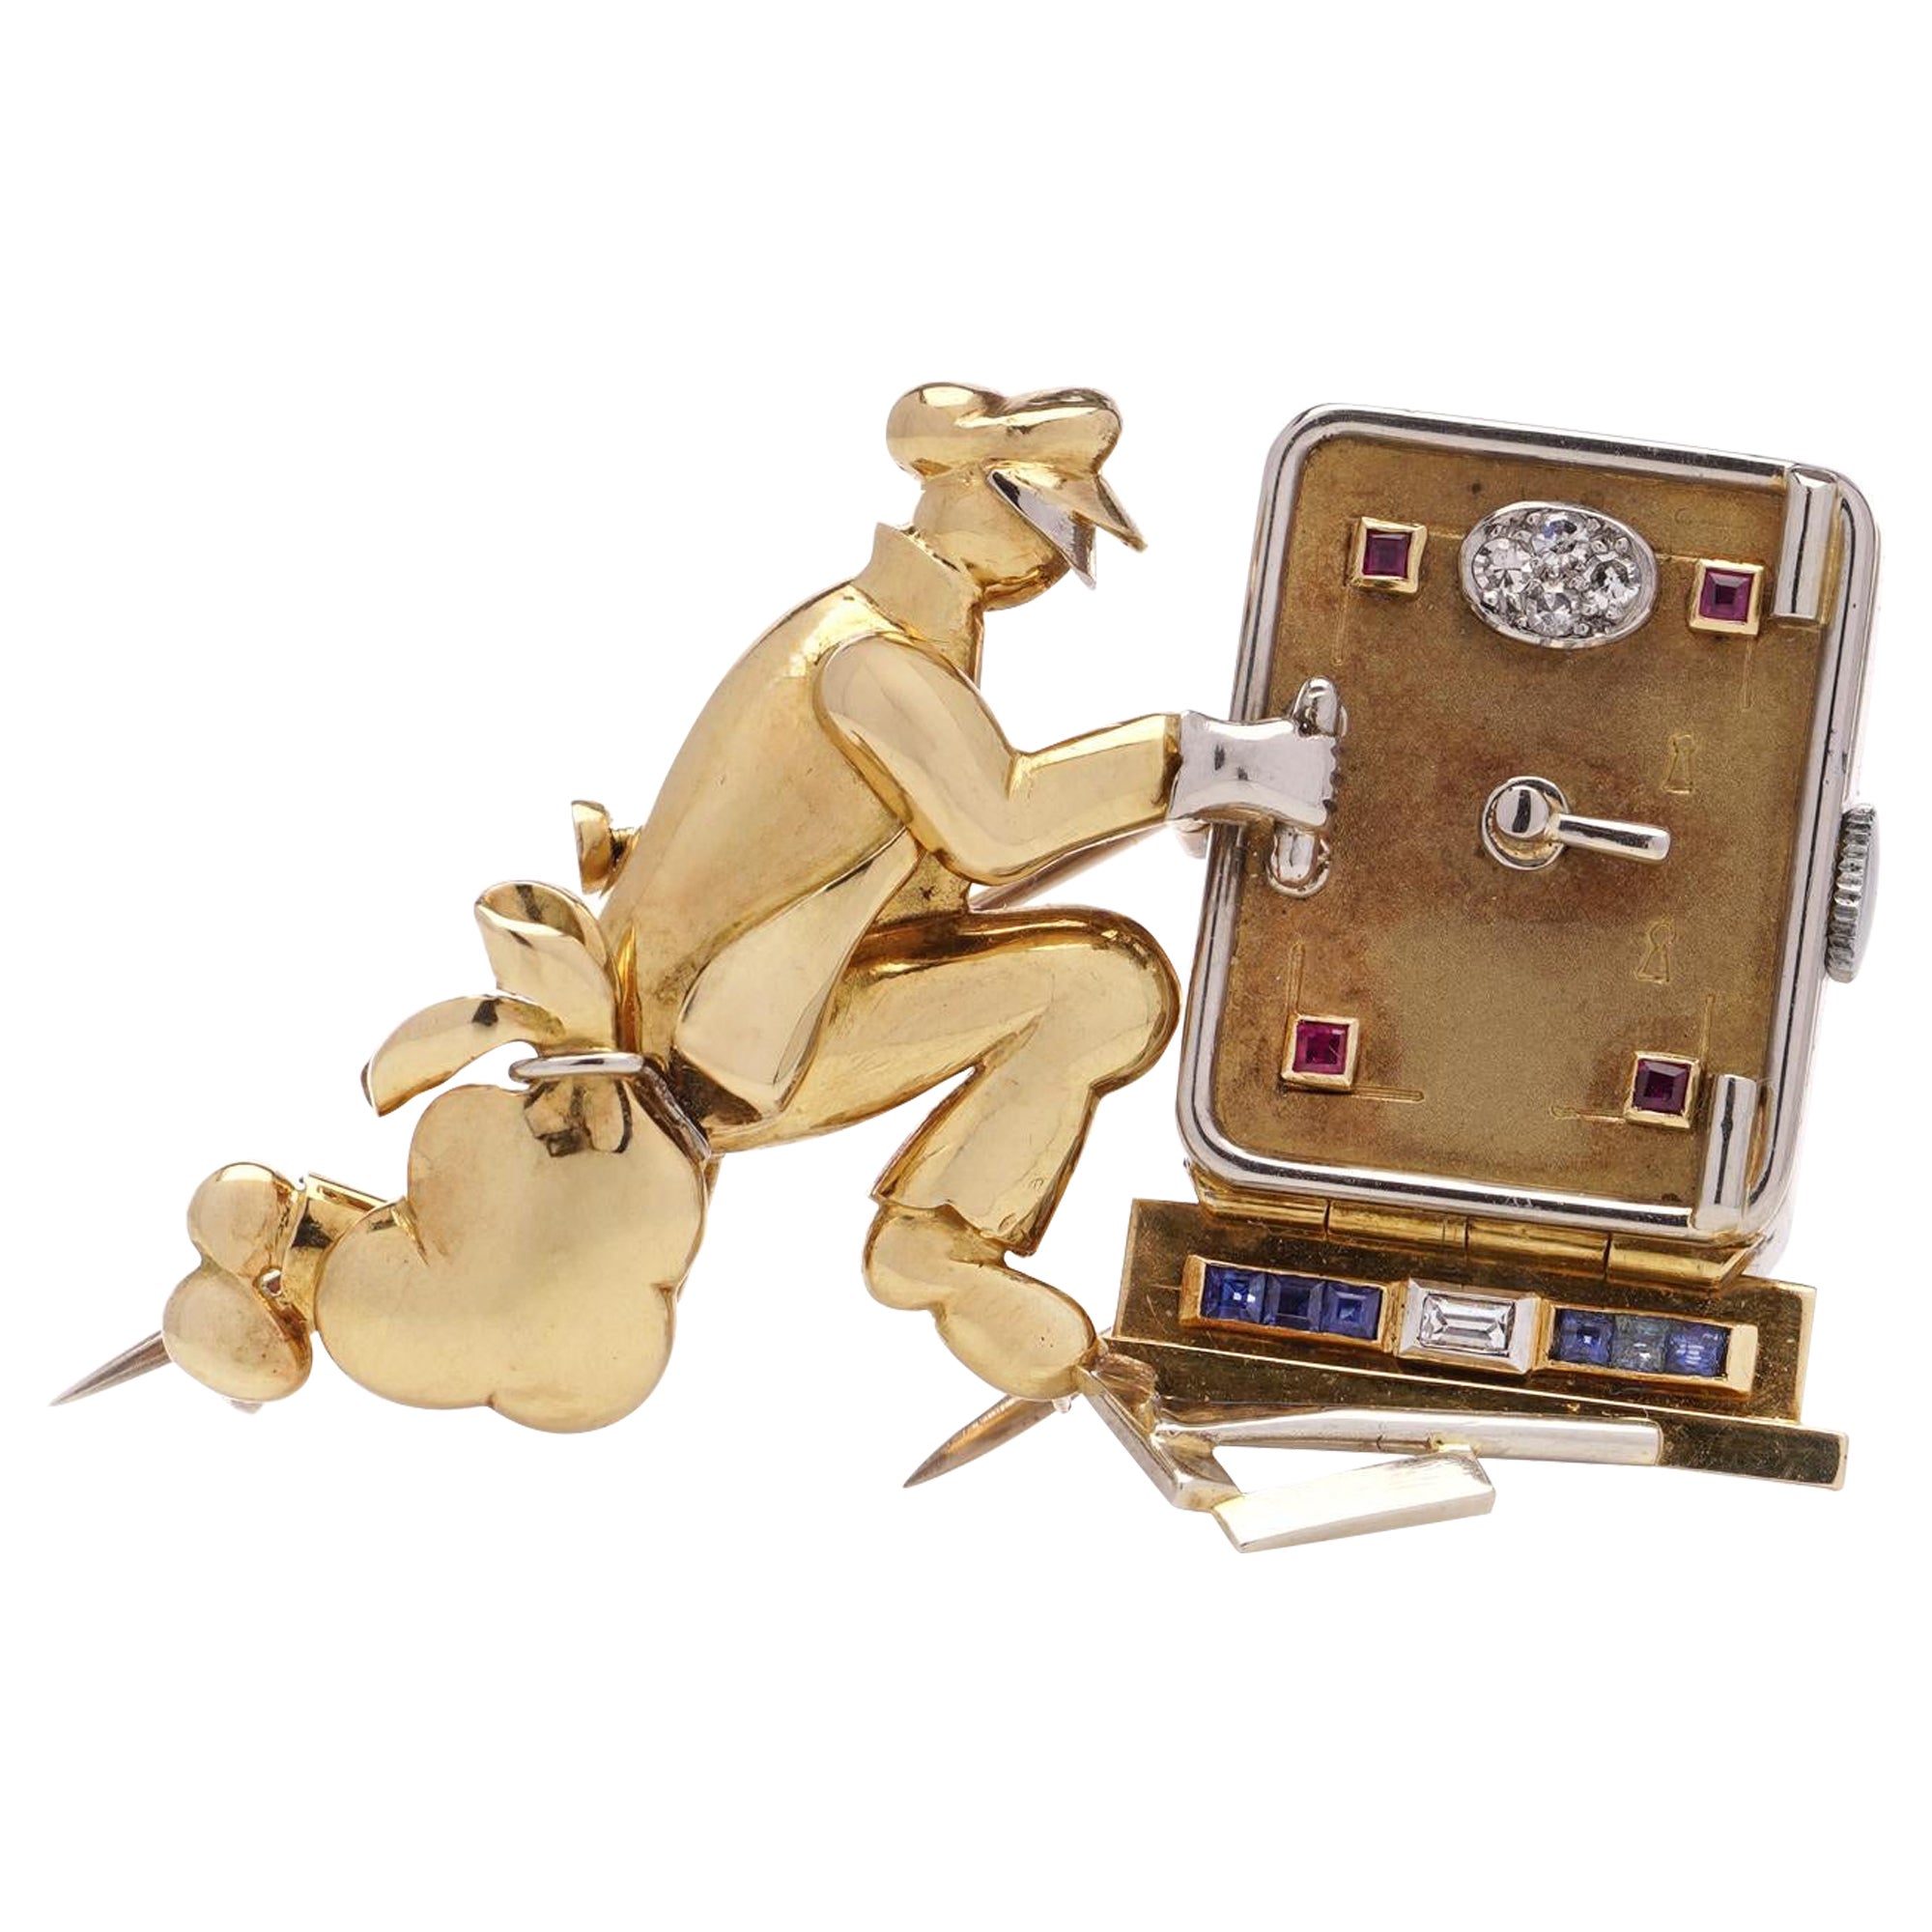 Lapel 18kt gold Jewelled safe cracker brooch with watch